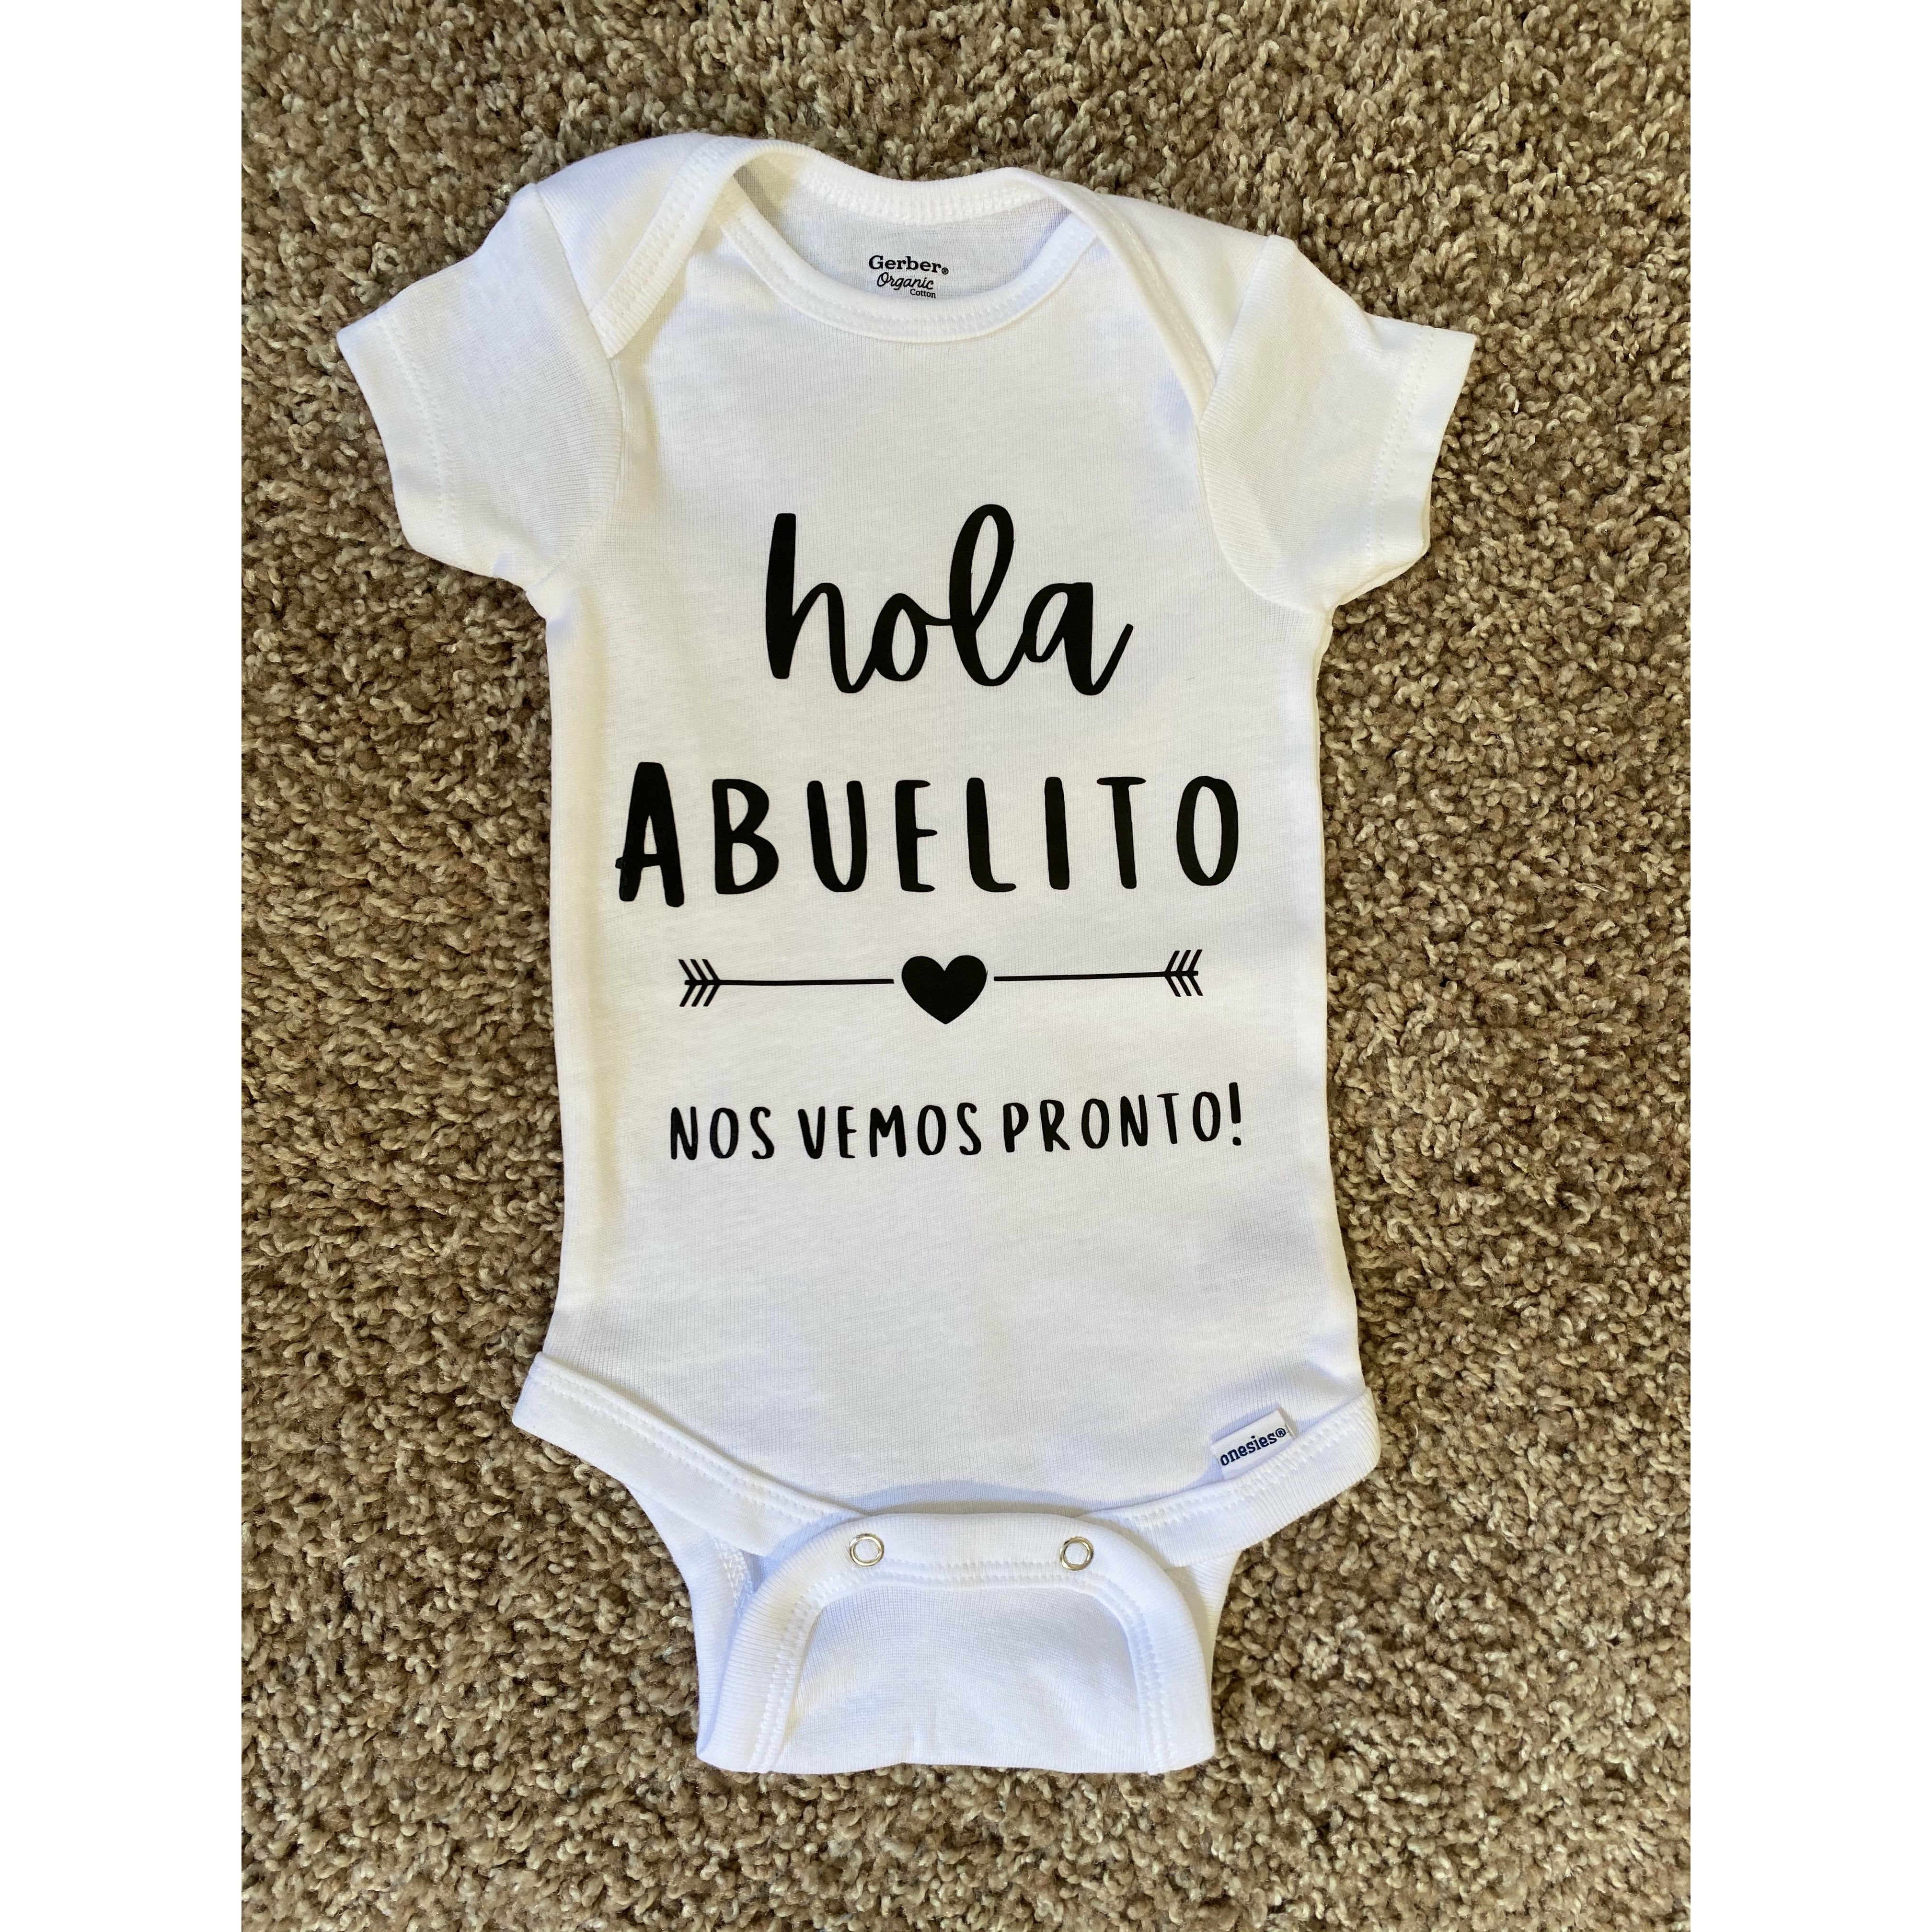 Vais a ser Abuelos Baby Bodysuit Pregnancy Announcement Cotton Baby Coming  Soon Ropa Outfit Summer Short